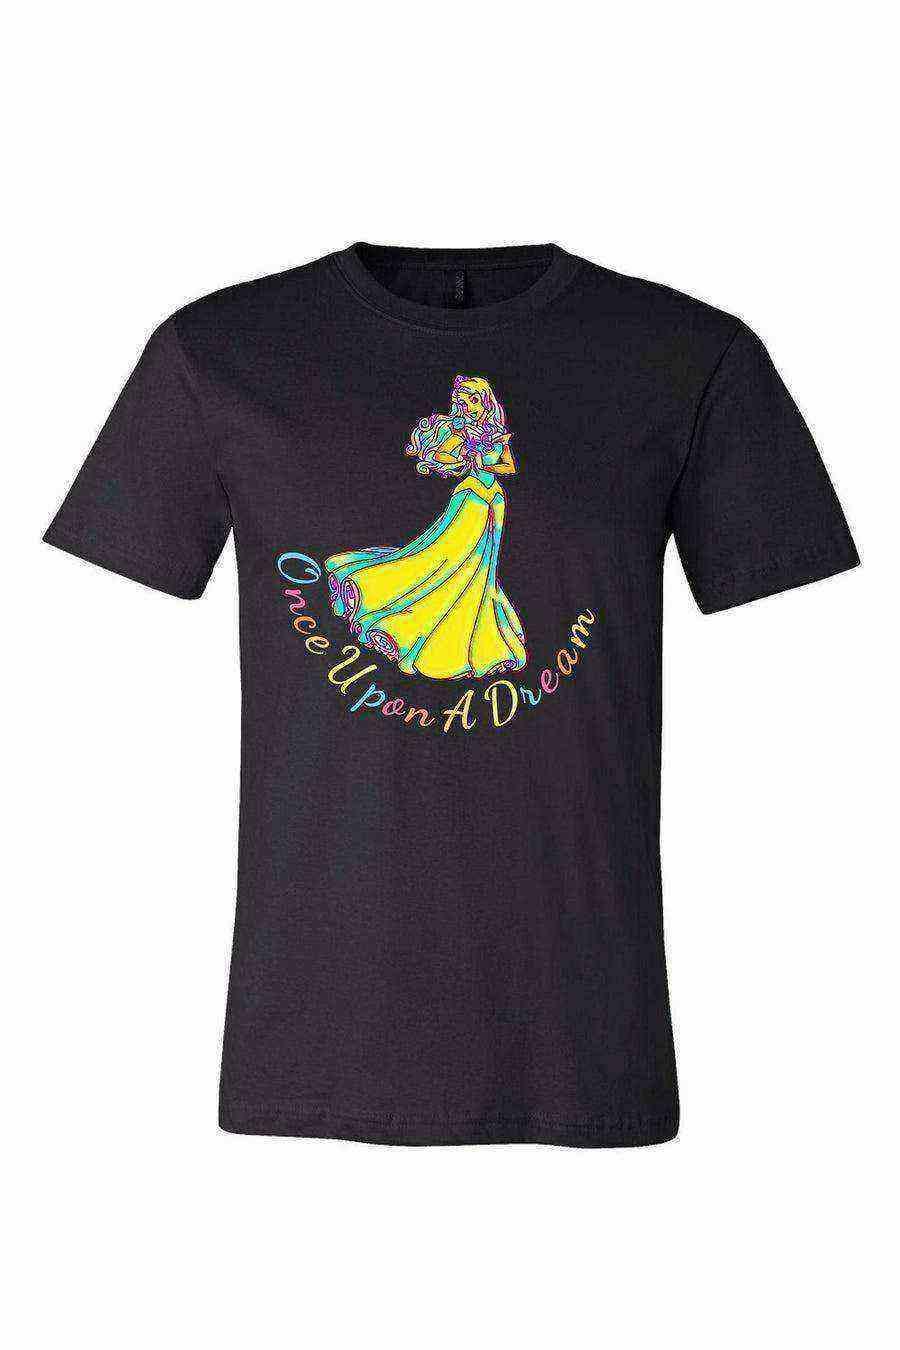 Youth | Sleeping Beauty Once Upon A Dream Shirt | Princess Aurora - Dylan's Tees